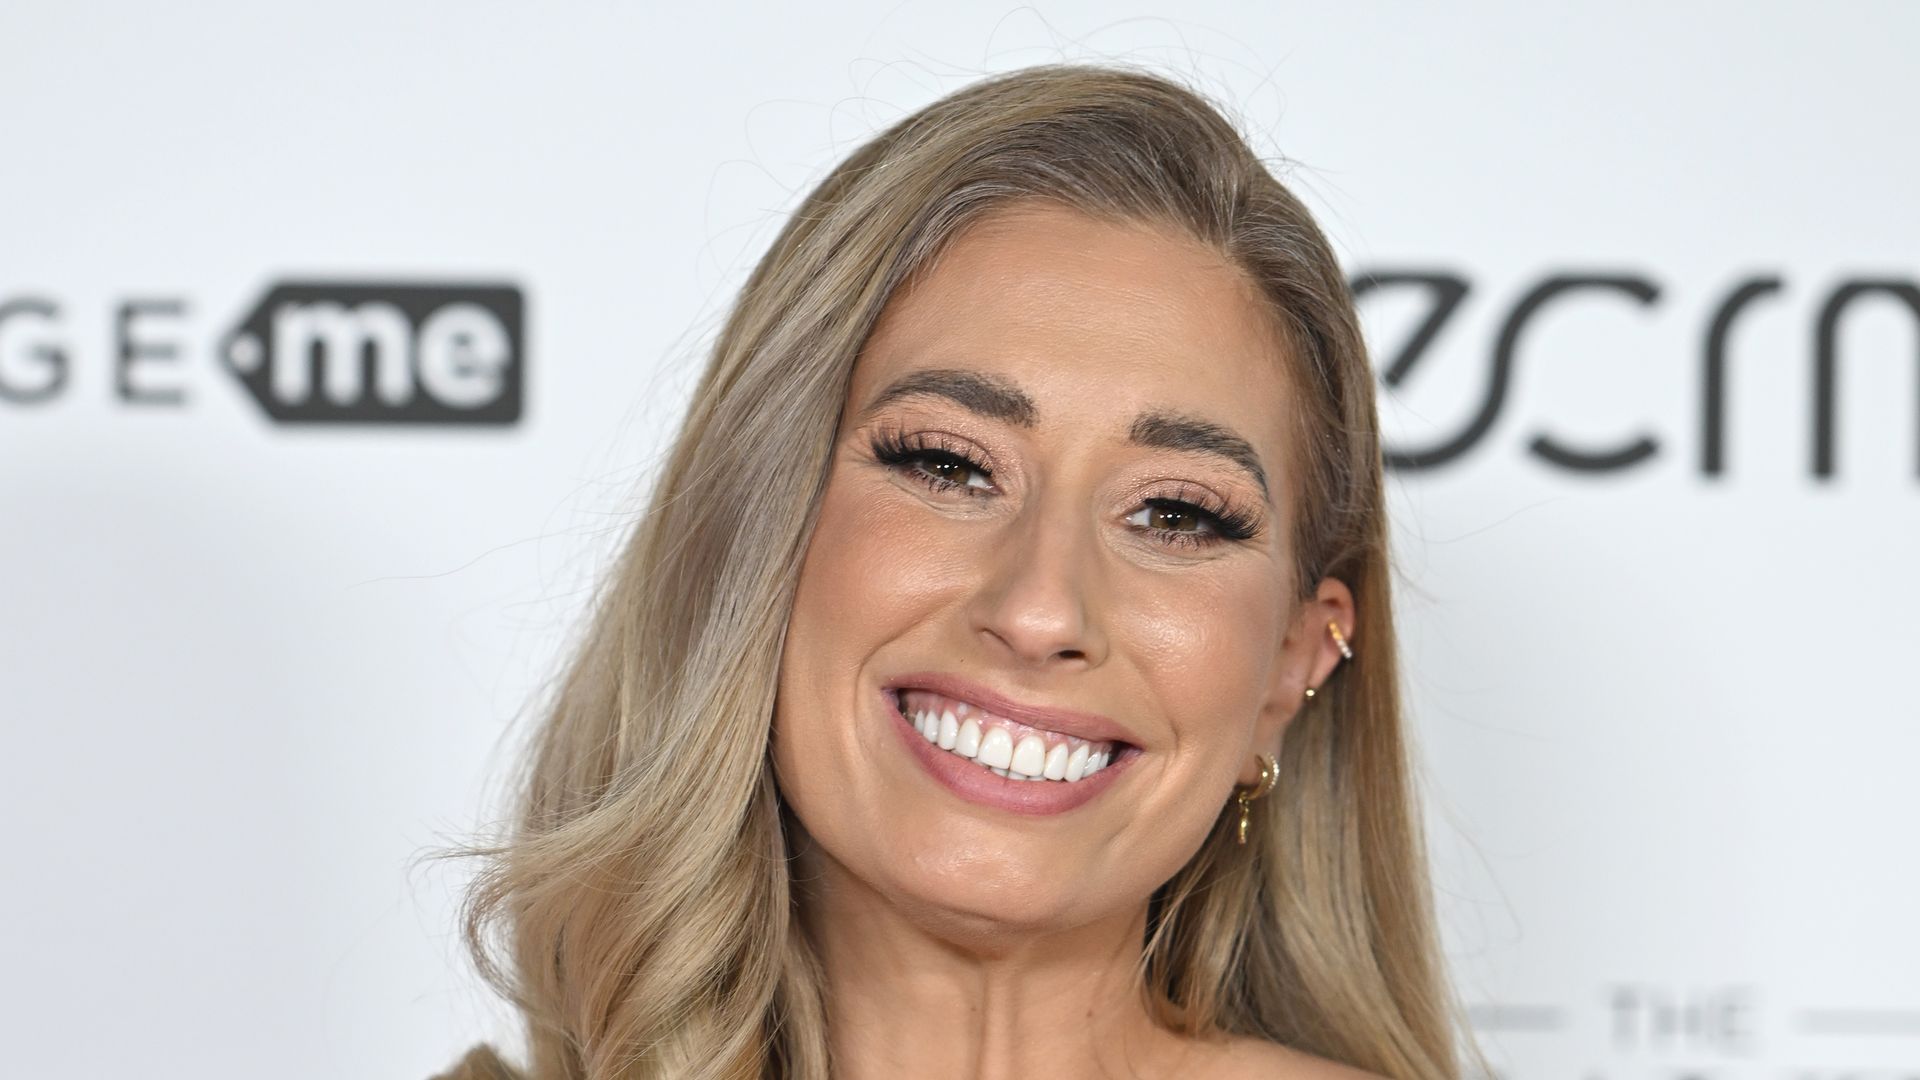 Stacey Solomon shares rare photo of son Zachary as he turns 16 - and they look so similar